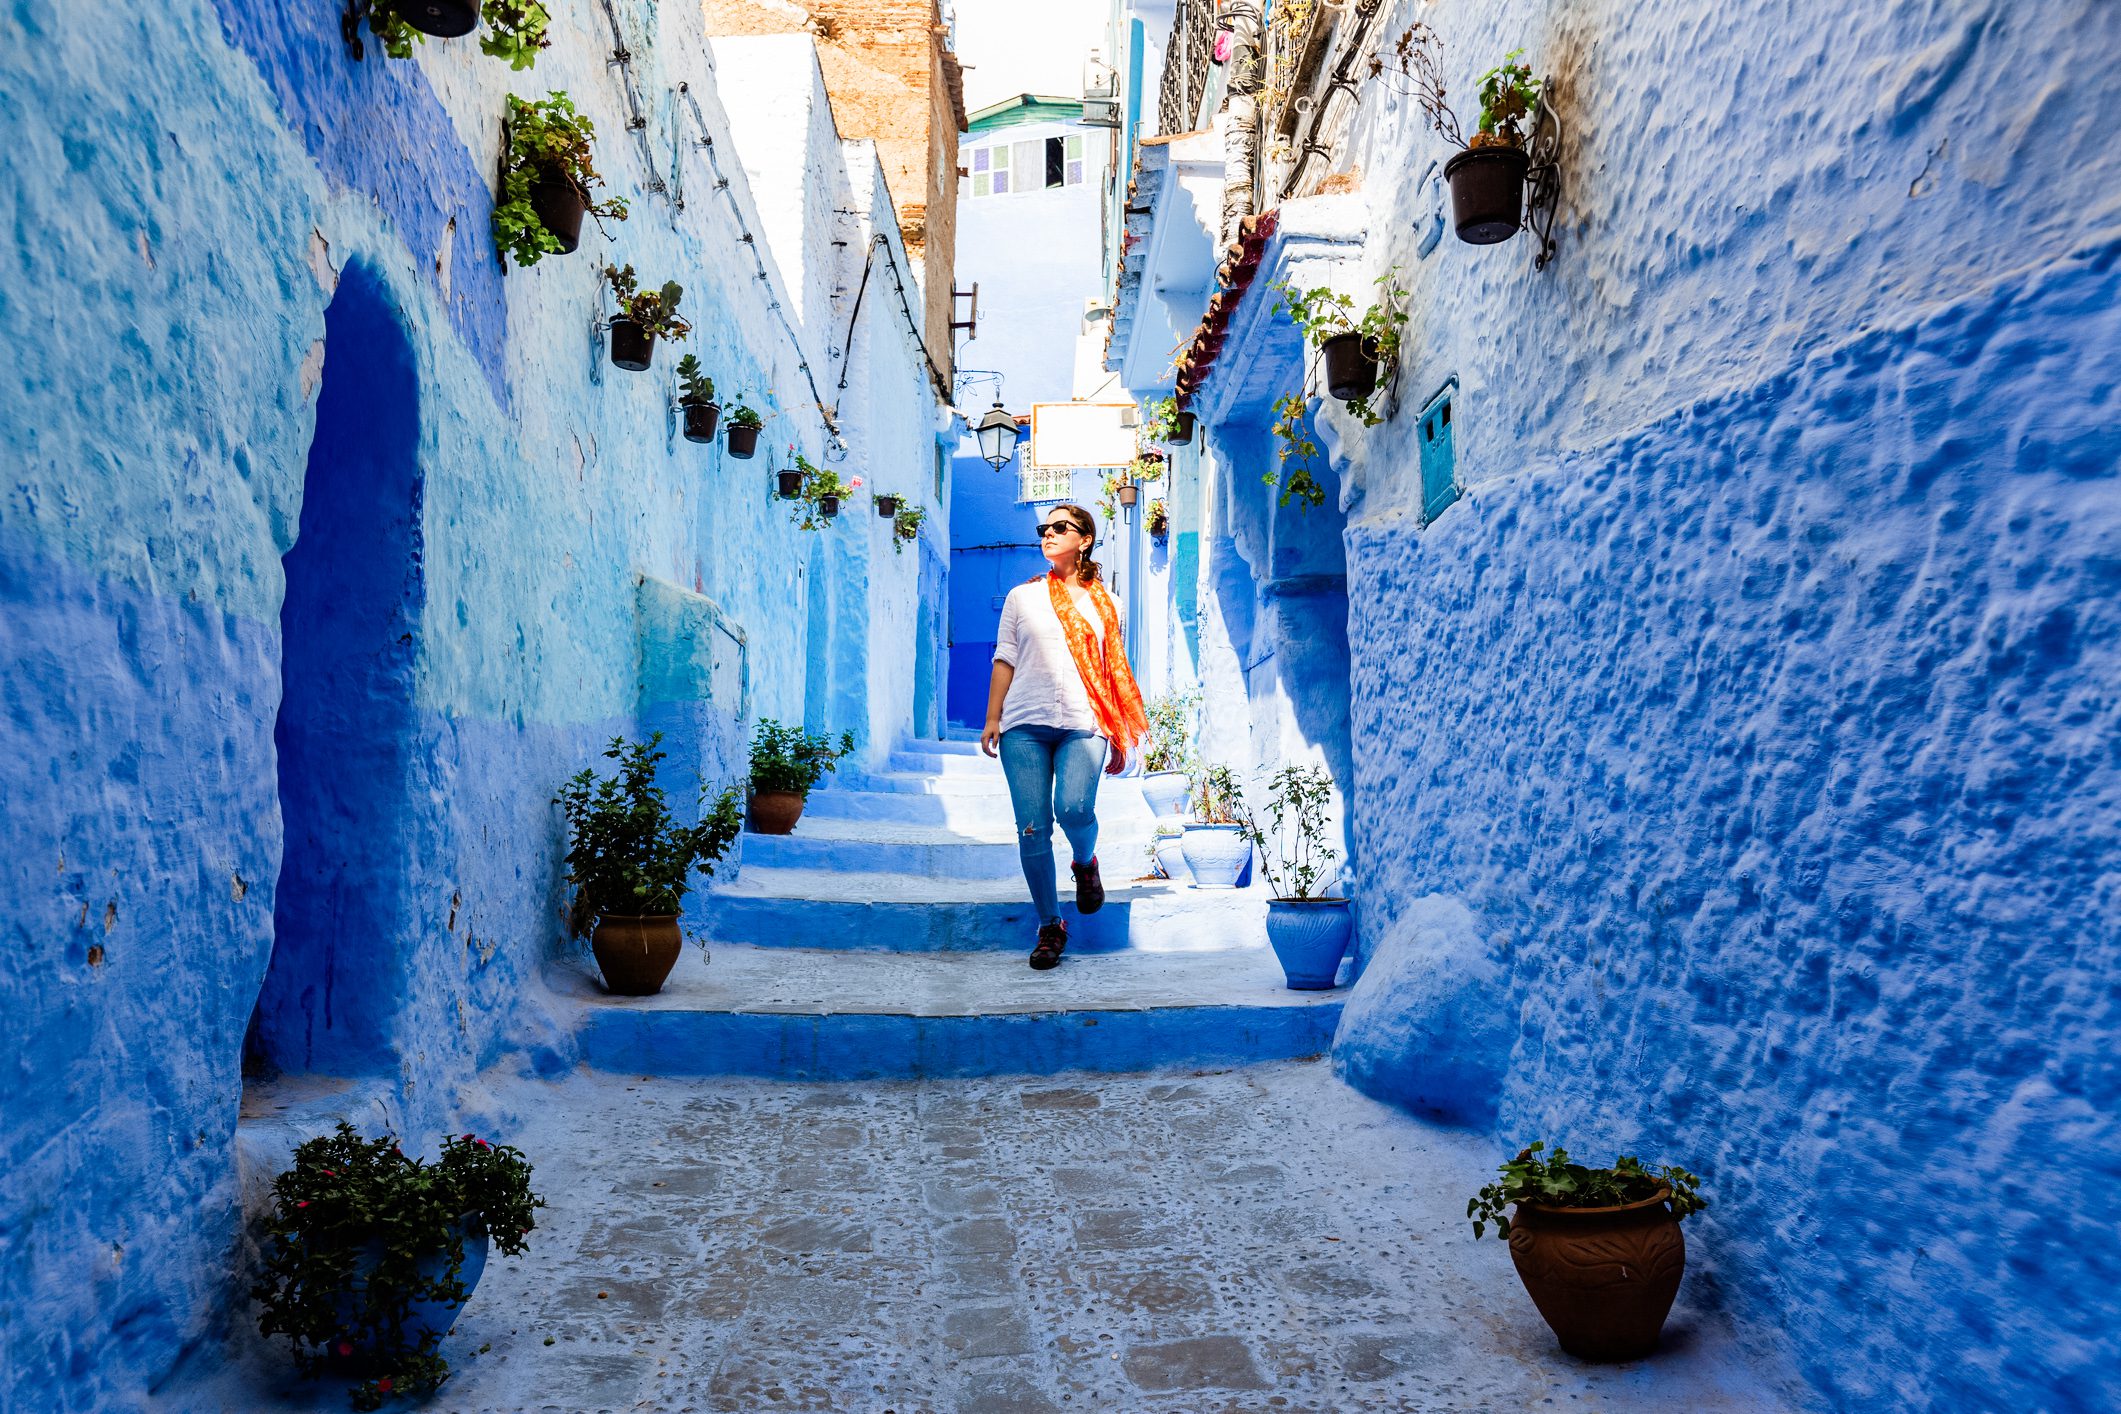 Narrow streets and blue painted houses of Chefchaouen city, Morocco.